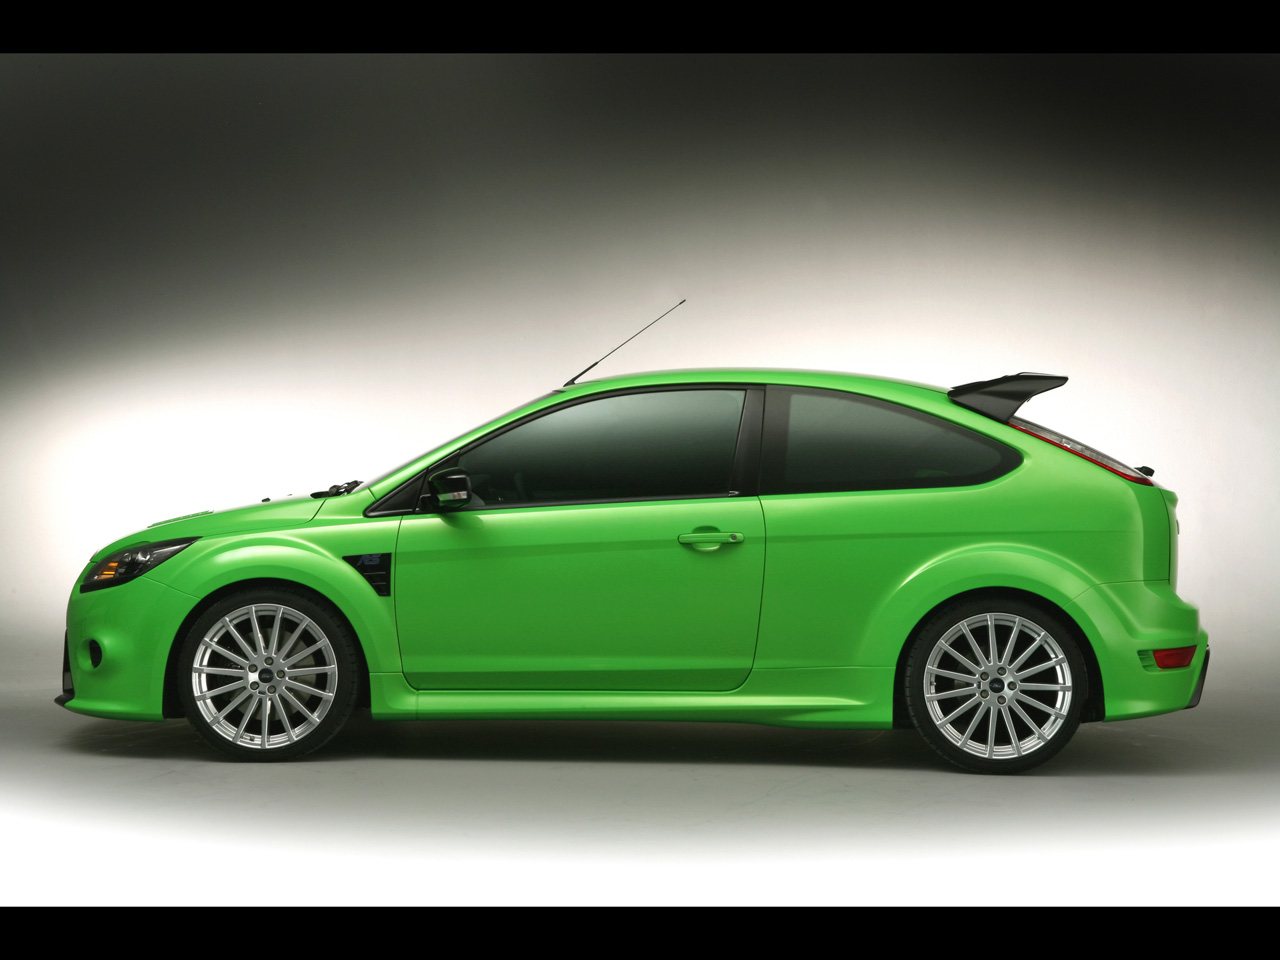 2009-Ford-Focus-RS-Side-1280x960.jpg